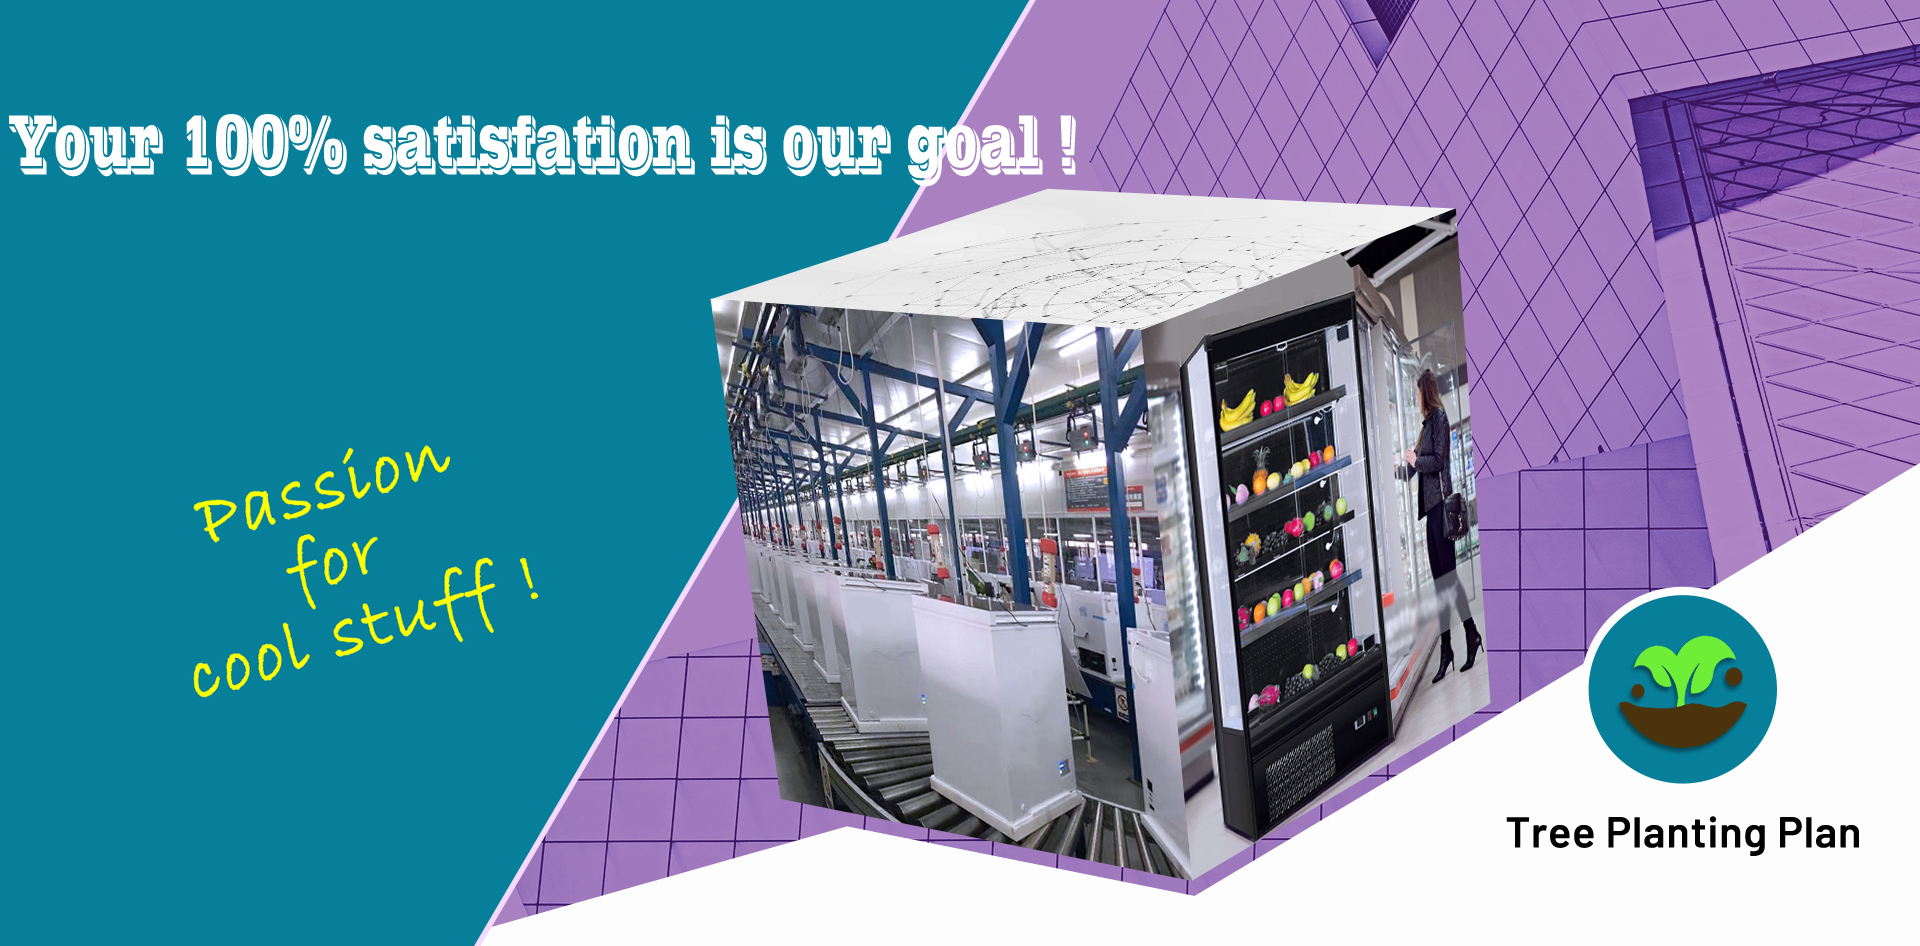 Commercial refrigerator OEM manufacturer from Nenwell China,a commercial fridge factory